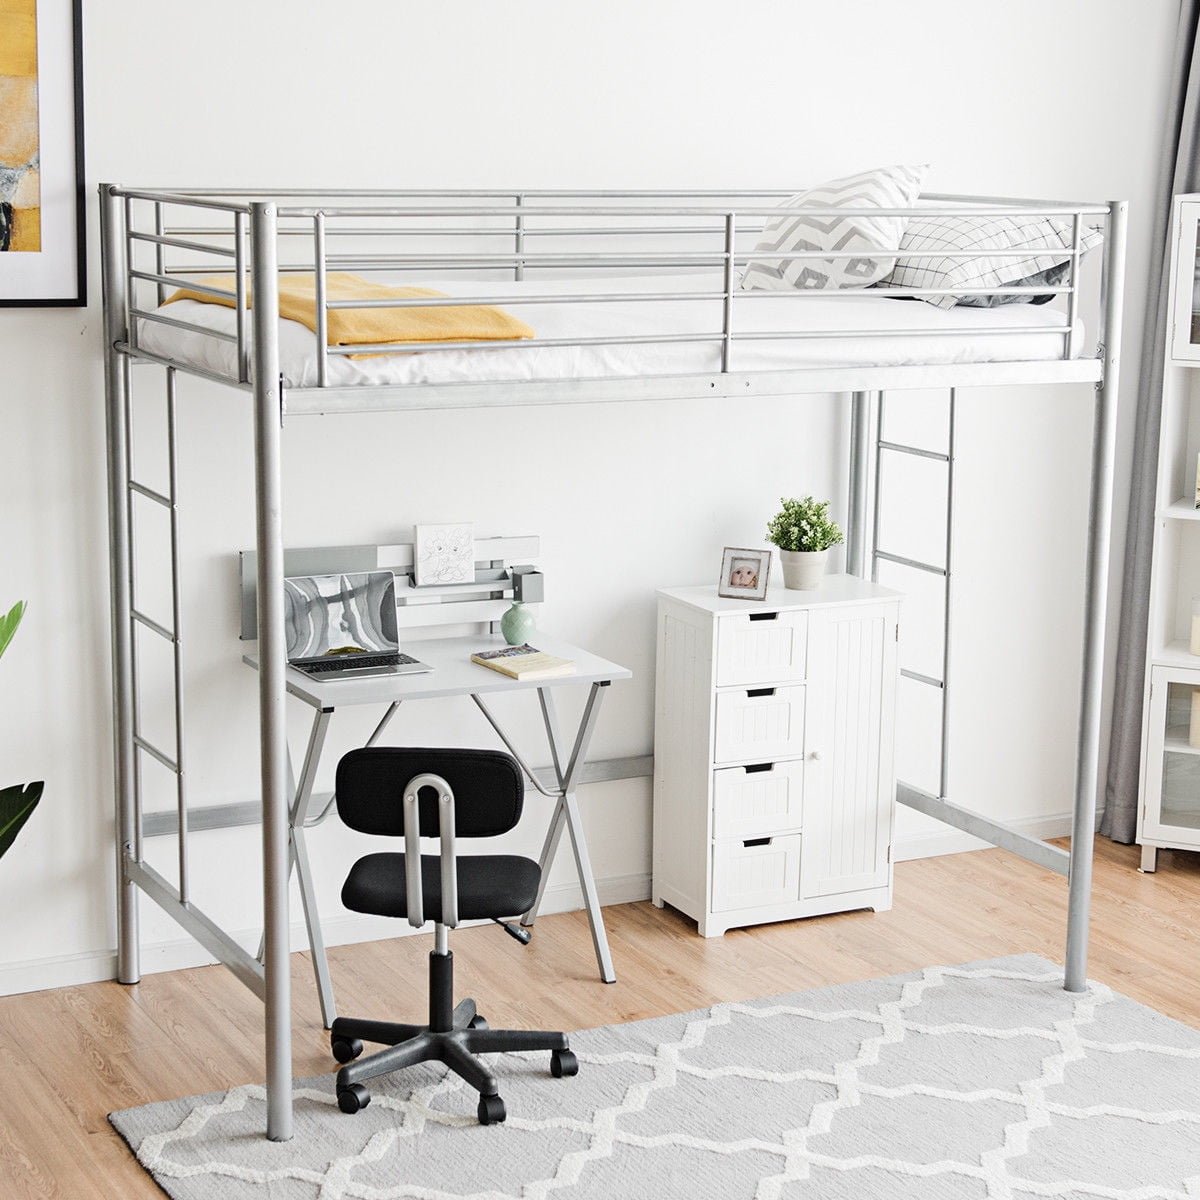 Your Zone Metal Loft Bed Twin Size, Your Zone Metal Loft Twin Bed Dimensions